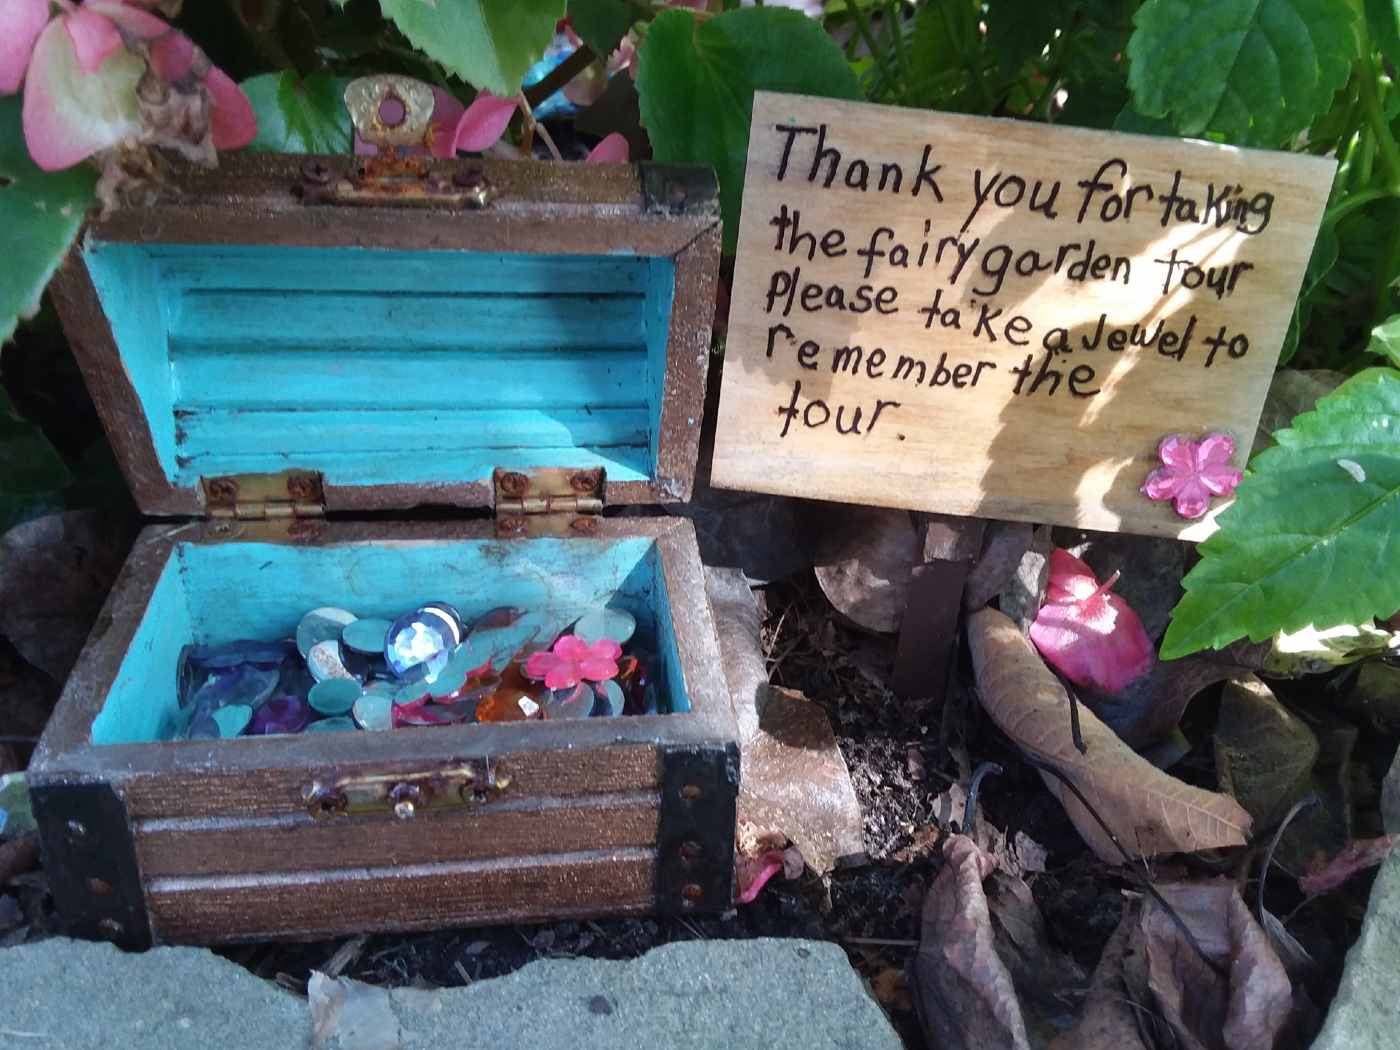 “Well, I hope you enjoyed your fairy garden tour”, say the words on the sign, “because I really enjoyed it so much. Please take a jewel to remember your visit.”